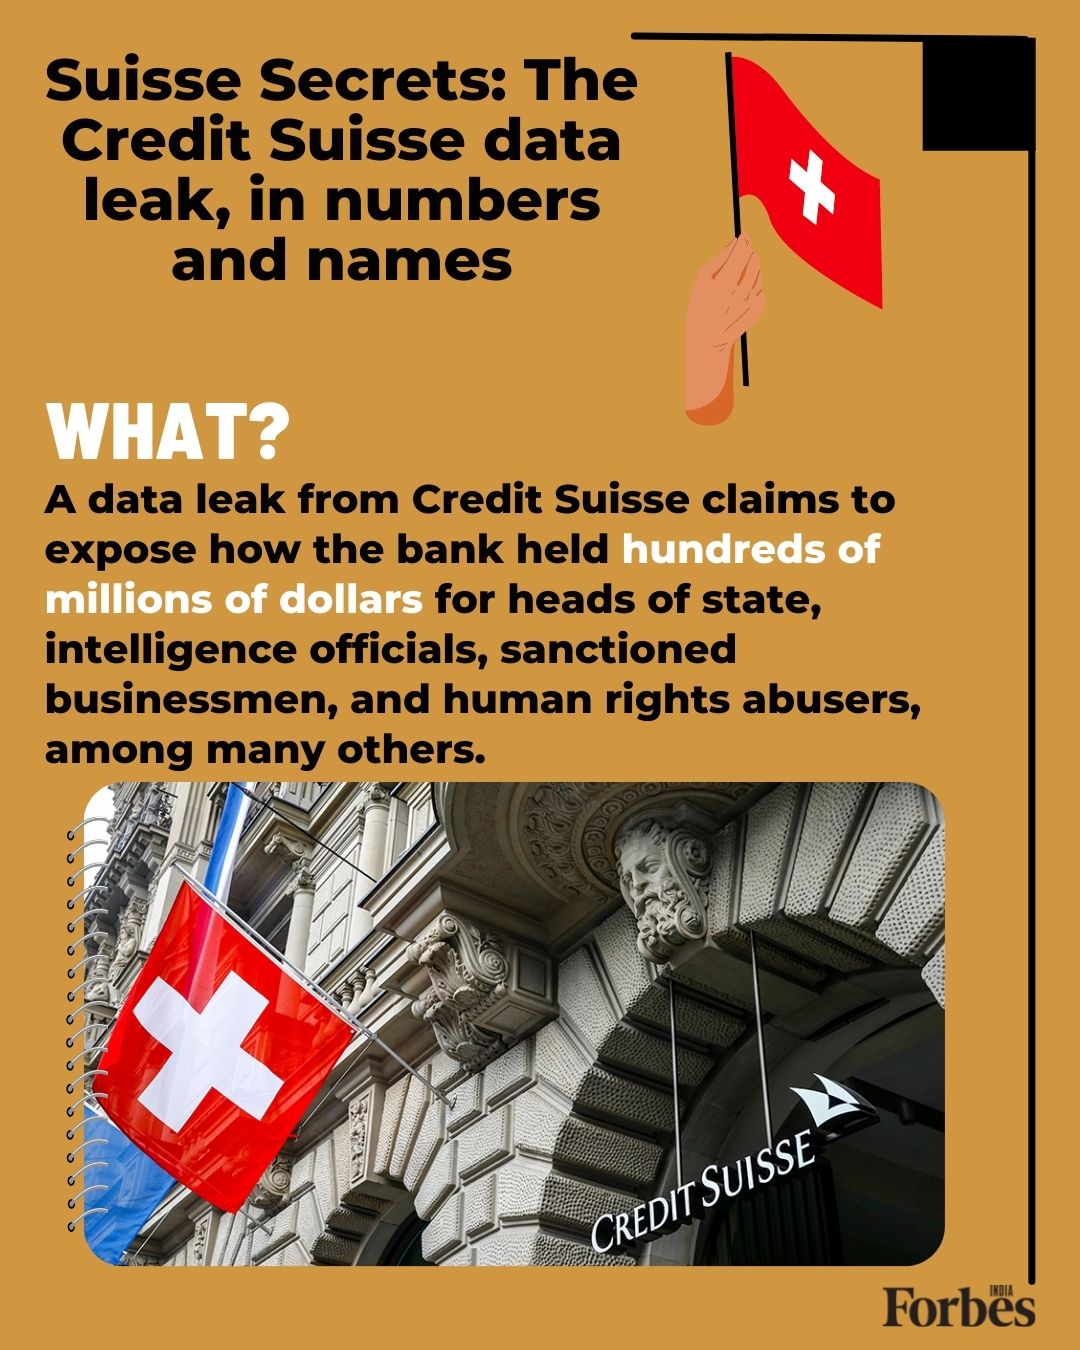 Suisse Secrets: The Credit Suisse leak in names and numbers